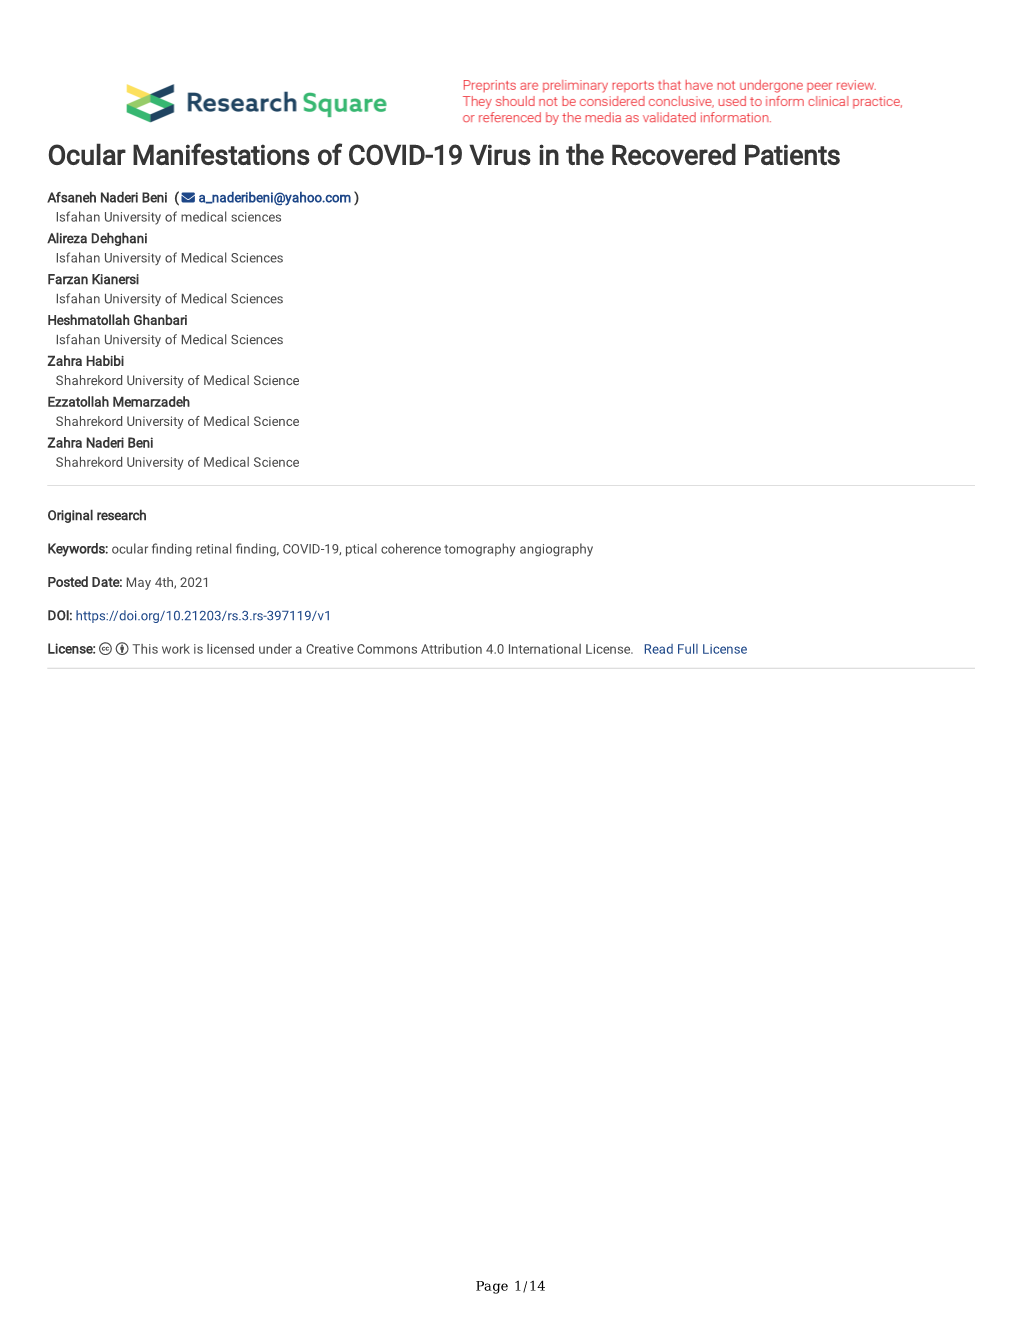 Ocular Manifestations of COVID-19 Virus in the Recovered Patients